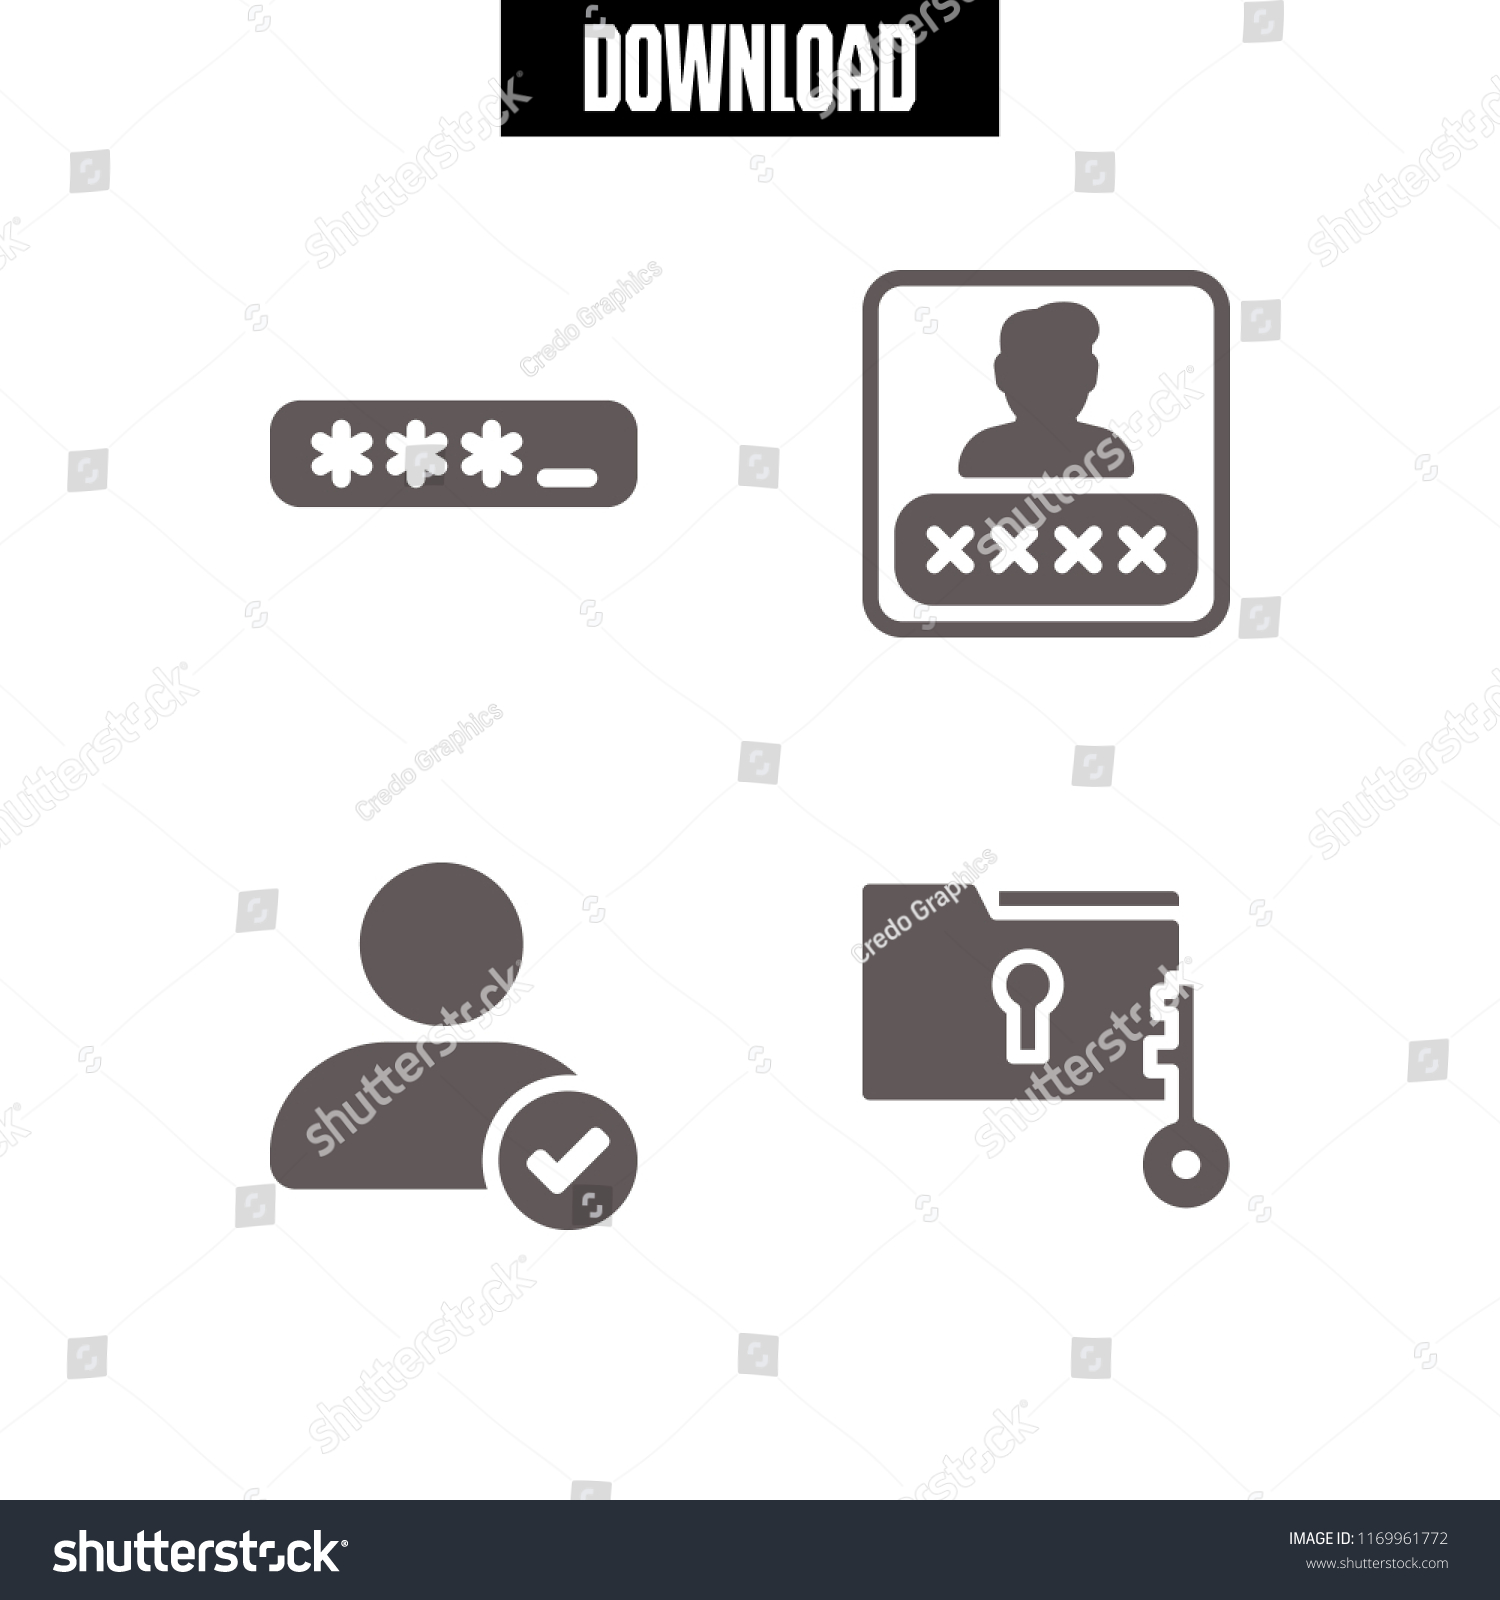 username icon. 4 username vector set. password and user verification interface symbol icons for web and design about username theme #1169961772